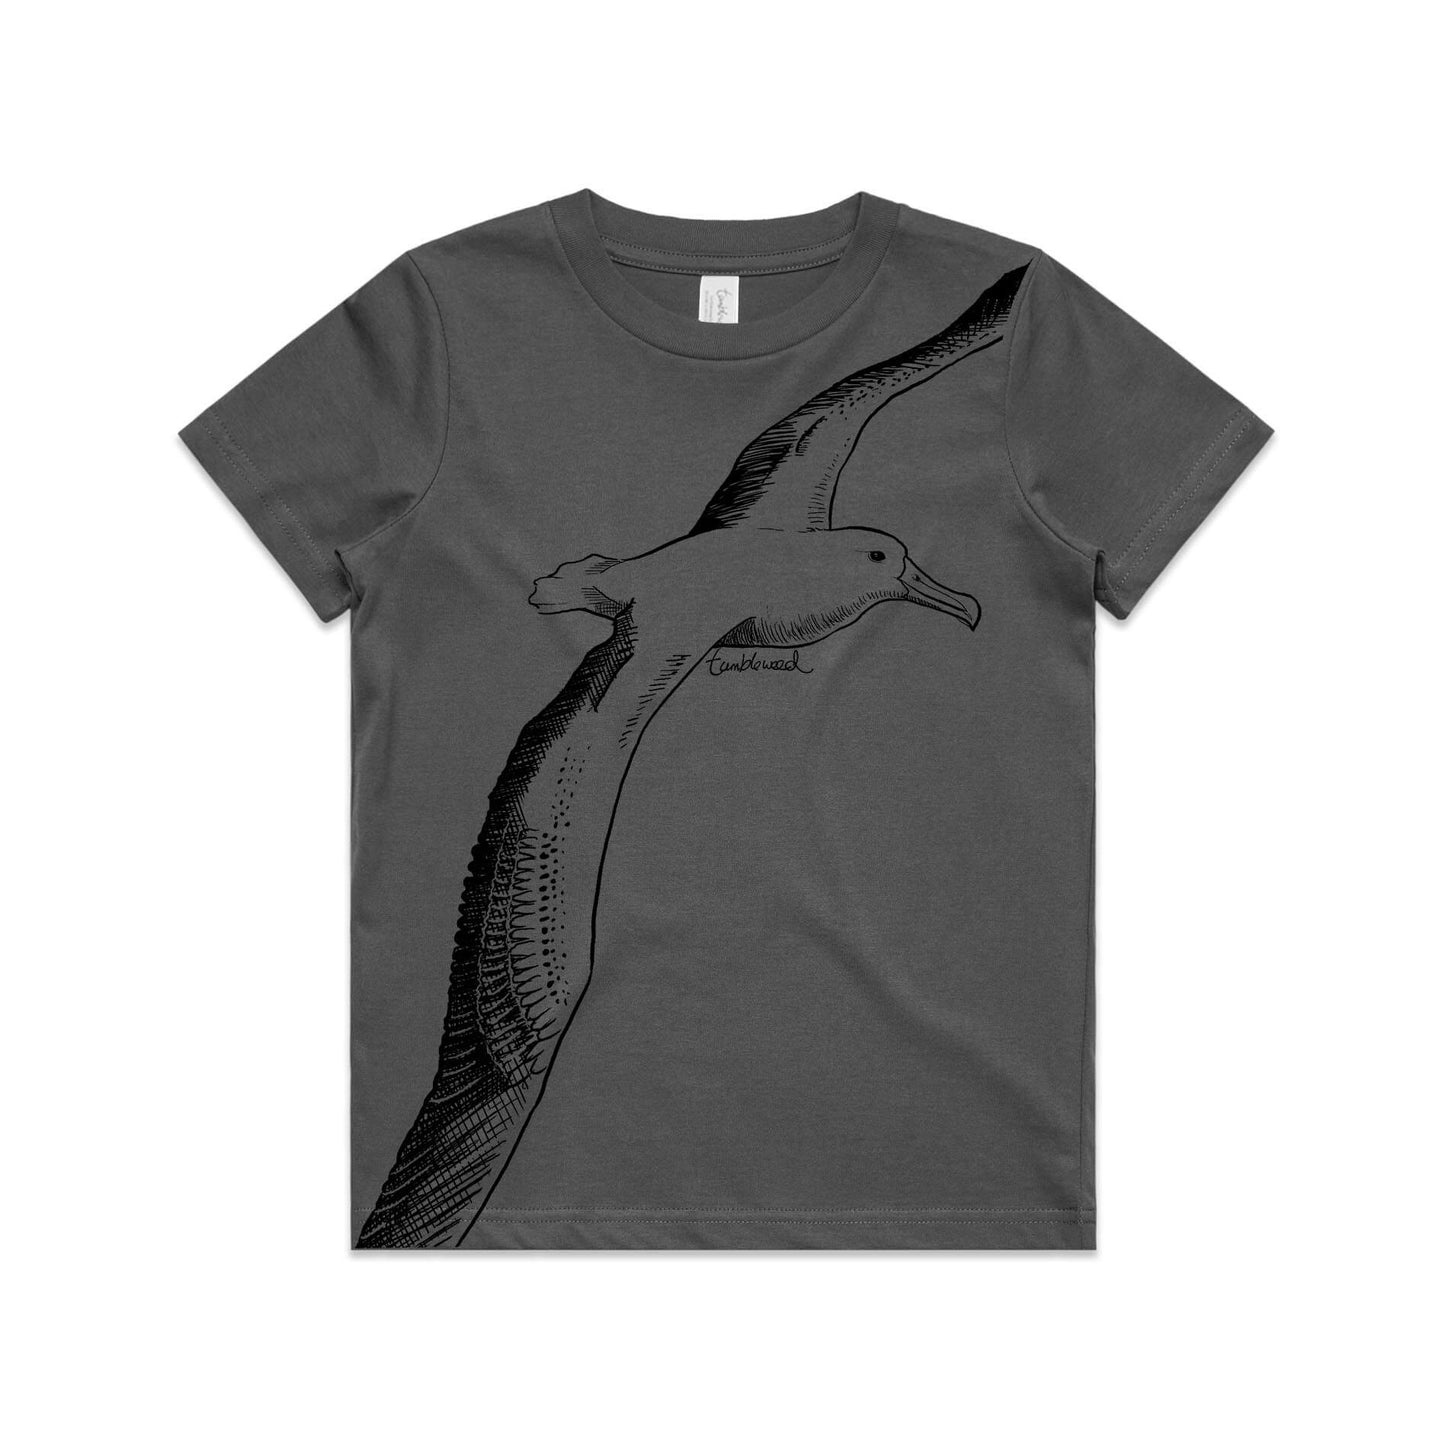 Charcoal, cotton kids' t-shirt with screen printed albatross design.